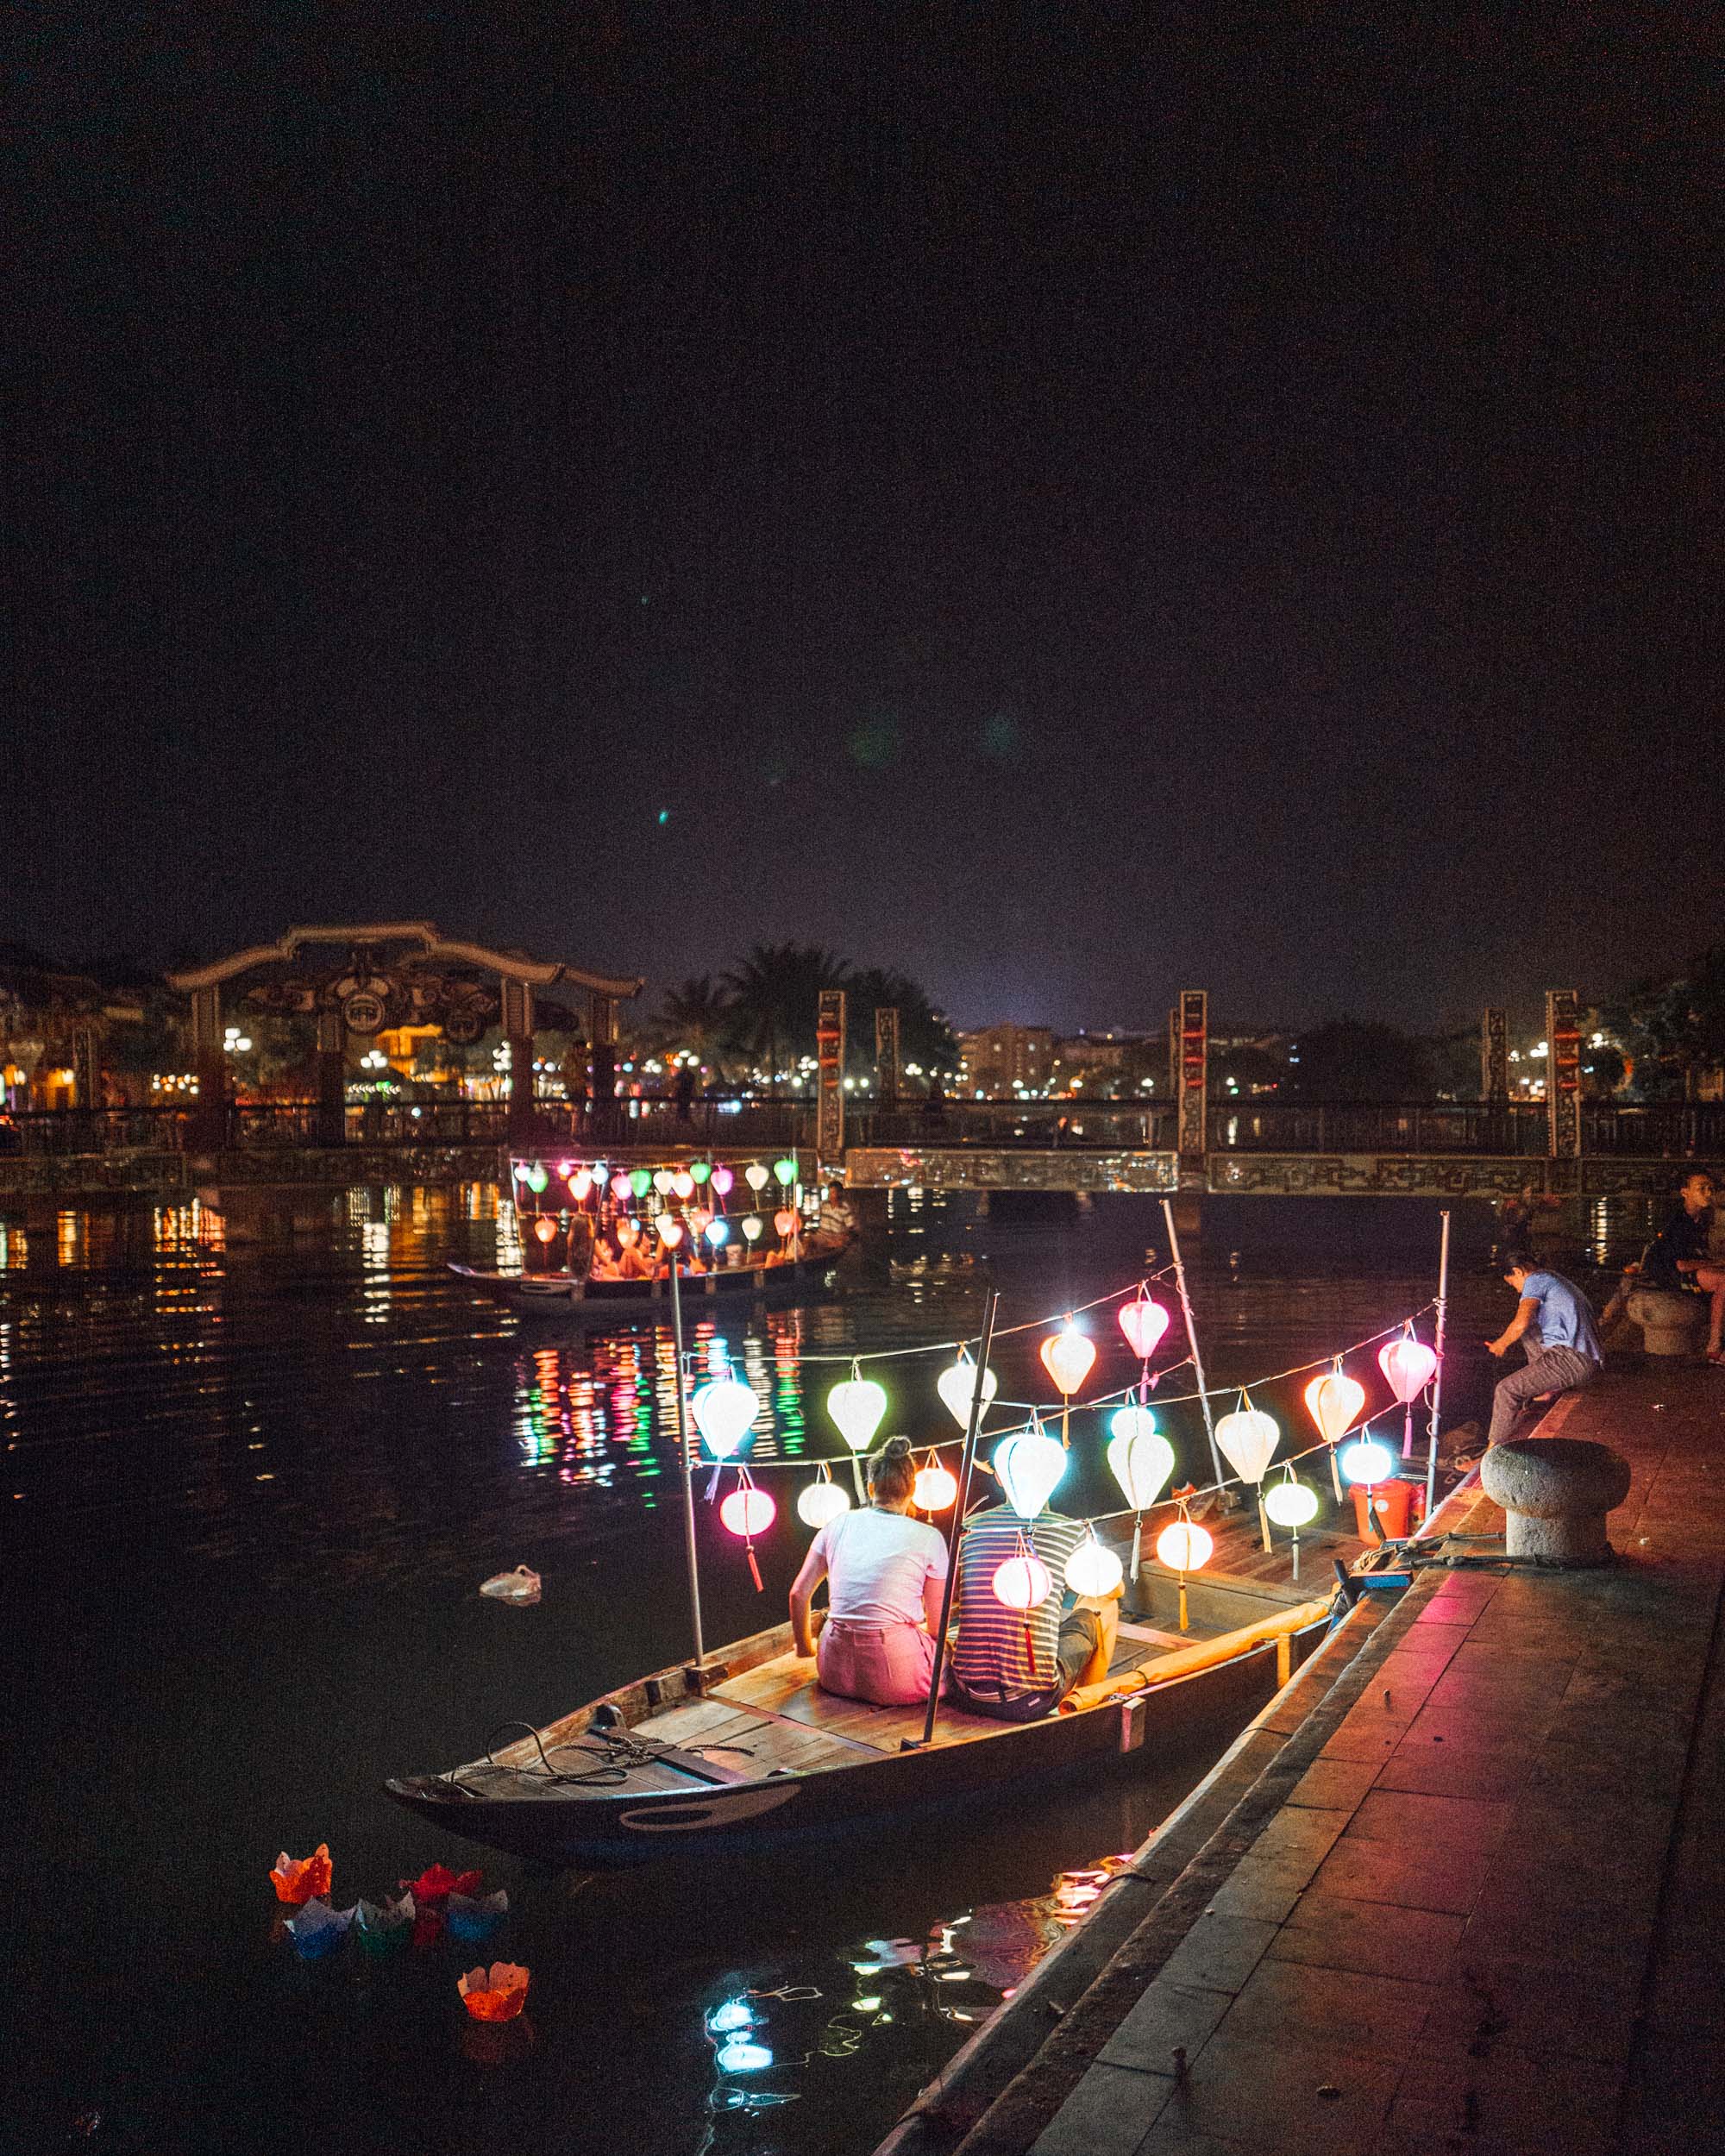 Lanterns and boats at night in Hoi An Vietnam